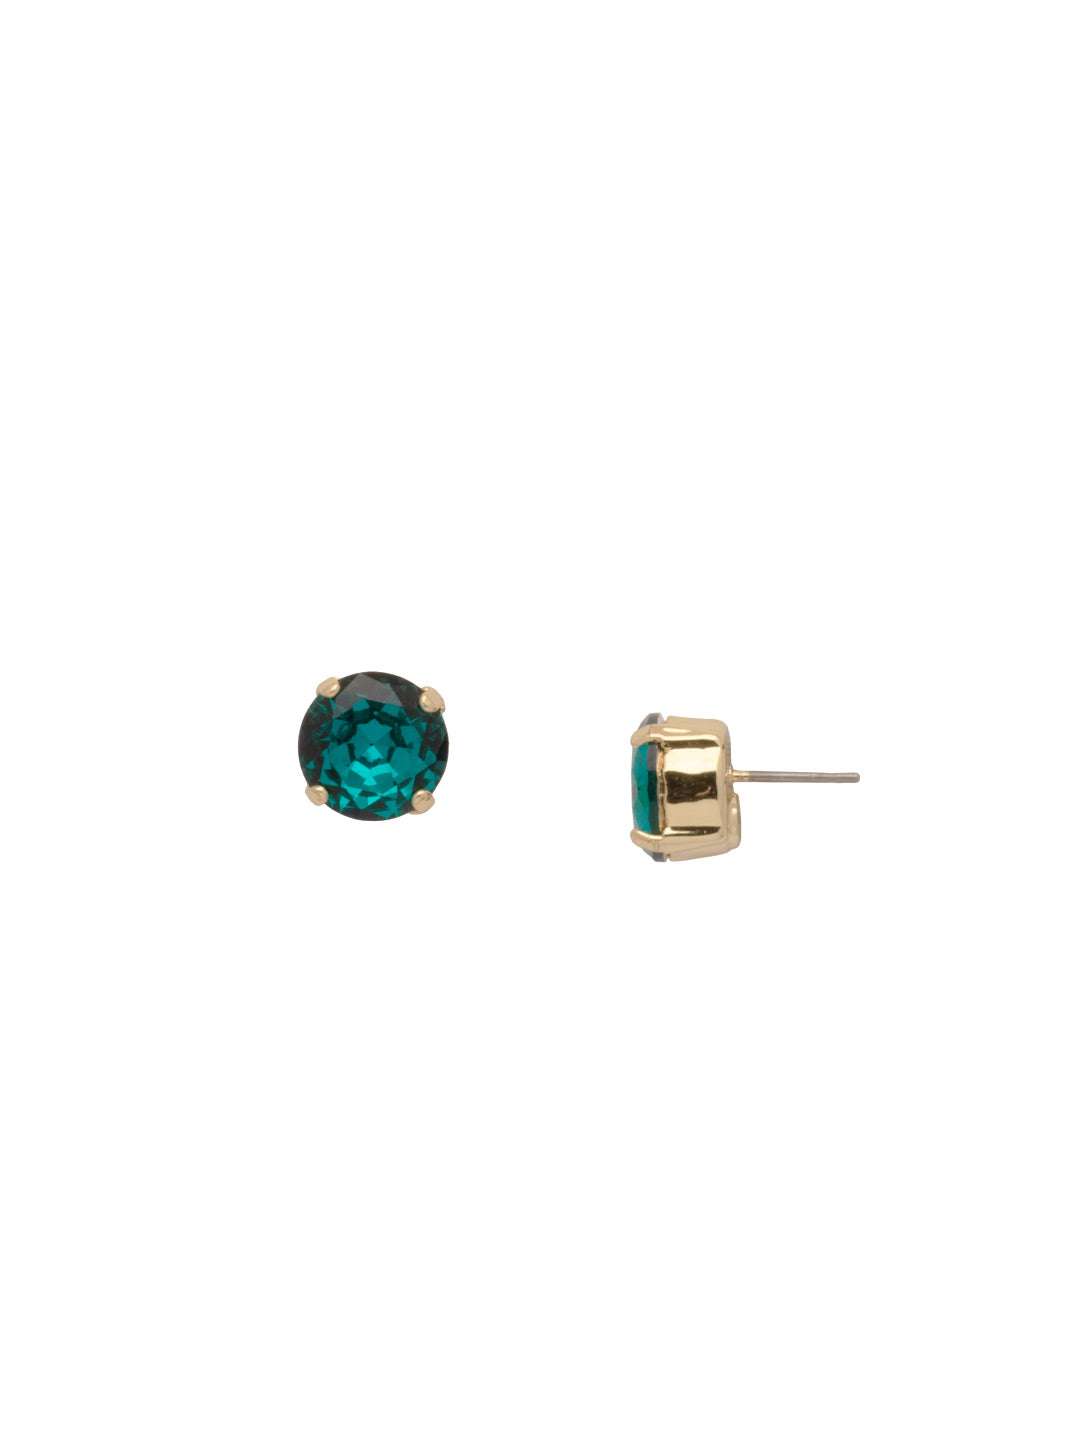 London Stud Earrings - ECM14BGHBR - <p>Everyone needs a great pair of studs. Add some classic sparkle to any occasion with these stud earrings. Need help picking a stud? <a href="https://www.sorrelli.com/blogs/sisterhood/round-stud-earrings-101-a-rundown-of-sizes-styles-and-sparkle">Check out our size guide!</a> From Sorrelli's Happy Birthday Redux collection in our Bright Gold-tone finish.</p>